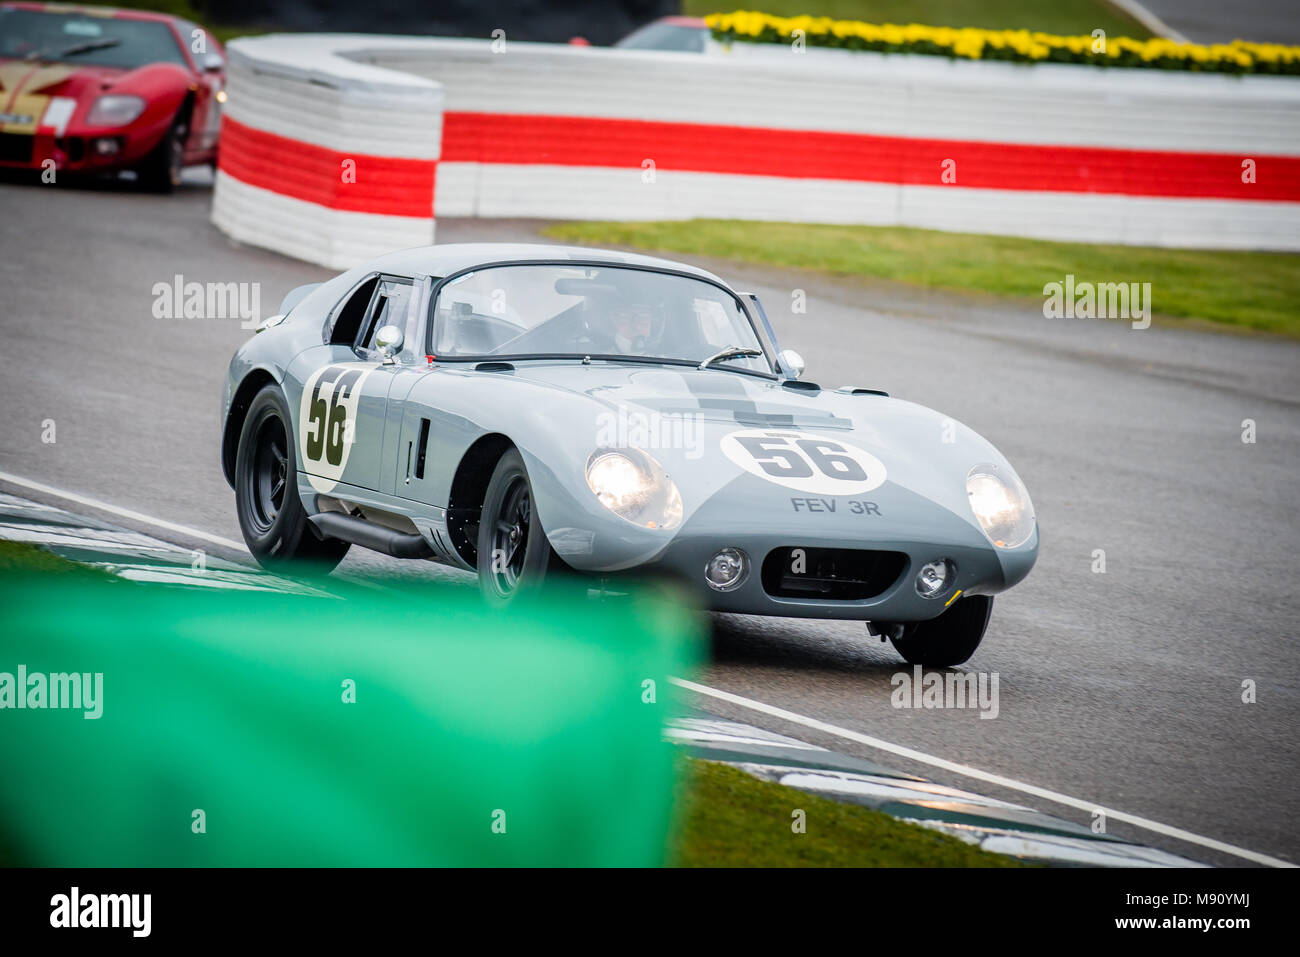 1964 Shelby Cobra Daytona Coupe out of the chicane at the 2018 Goodwood Members Meeting, 76MM Stock Photo